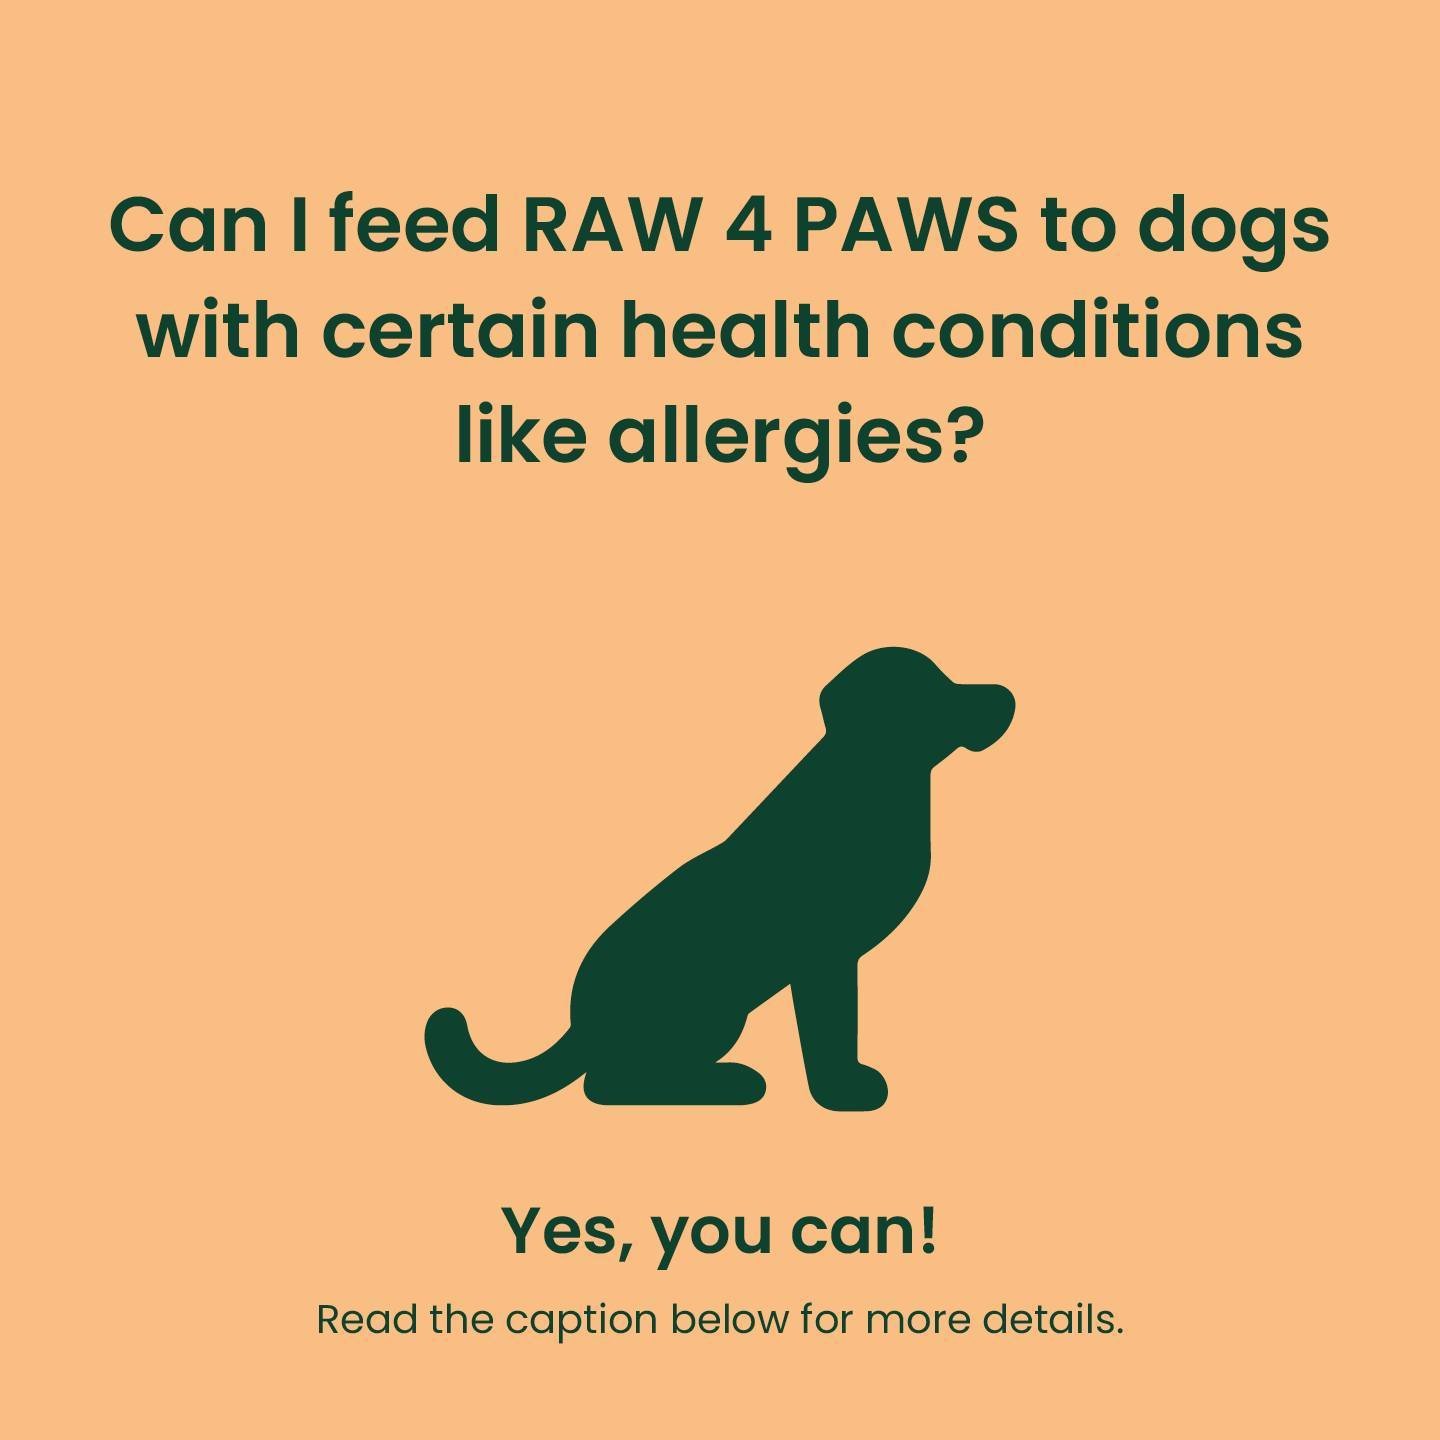 Since RAW 4 PAWS only contains one animal protein per variety, i.e. chicken only contains chicken meat, bone and organs meats, it is easy to single out and avoid the protein/meat your pet is reacting to 🐕 

Simply change to other varieties of the RA